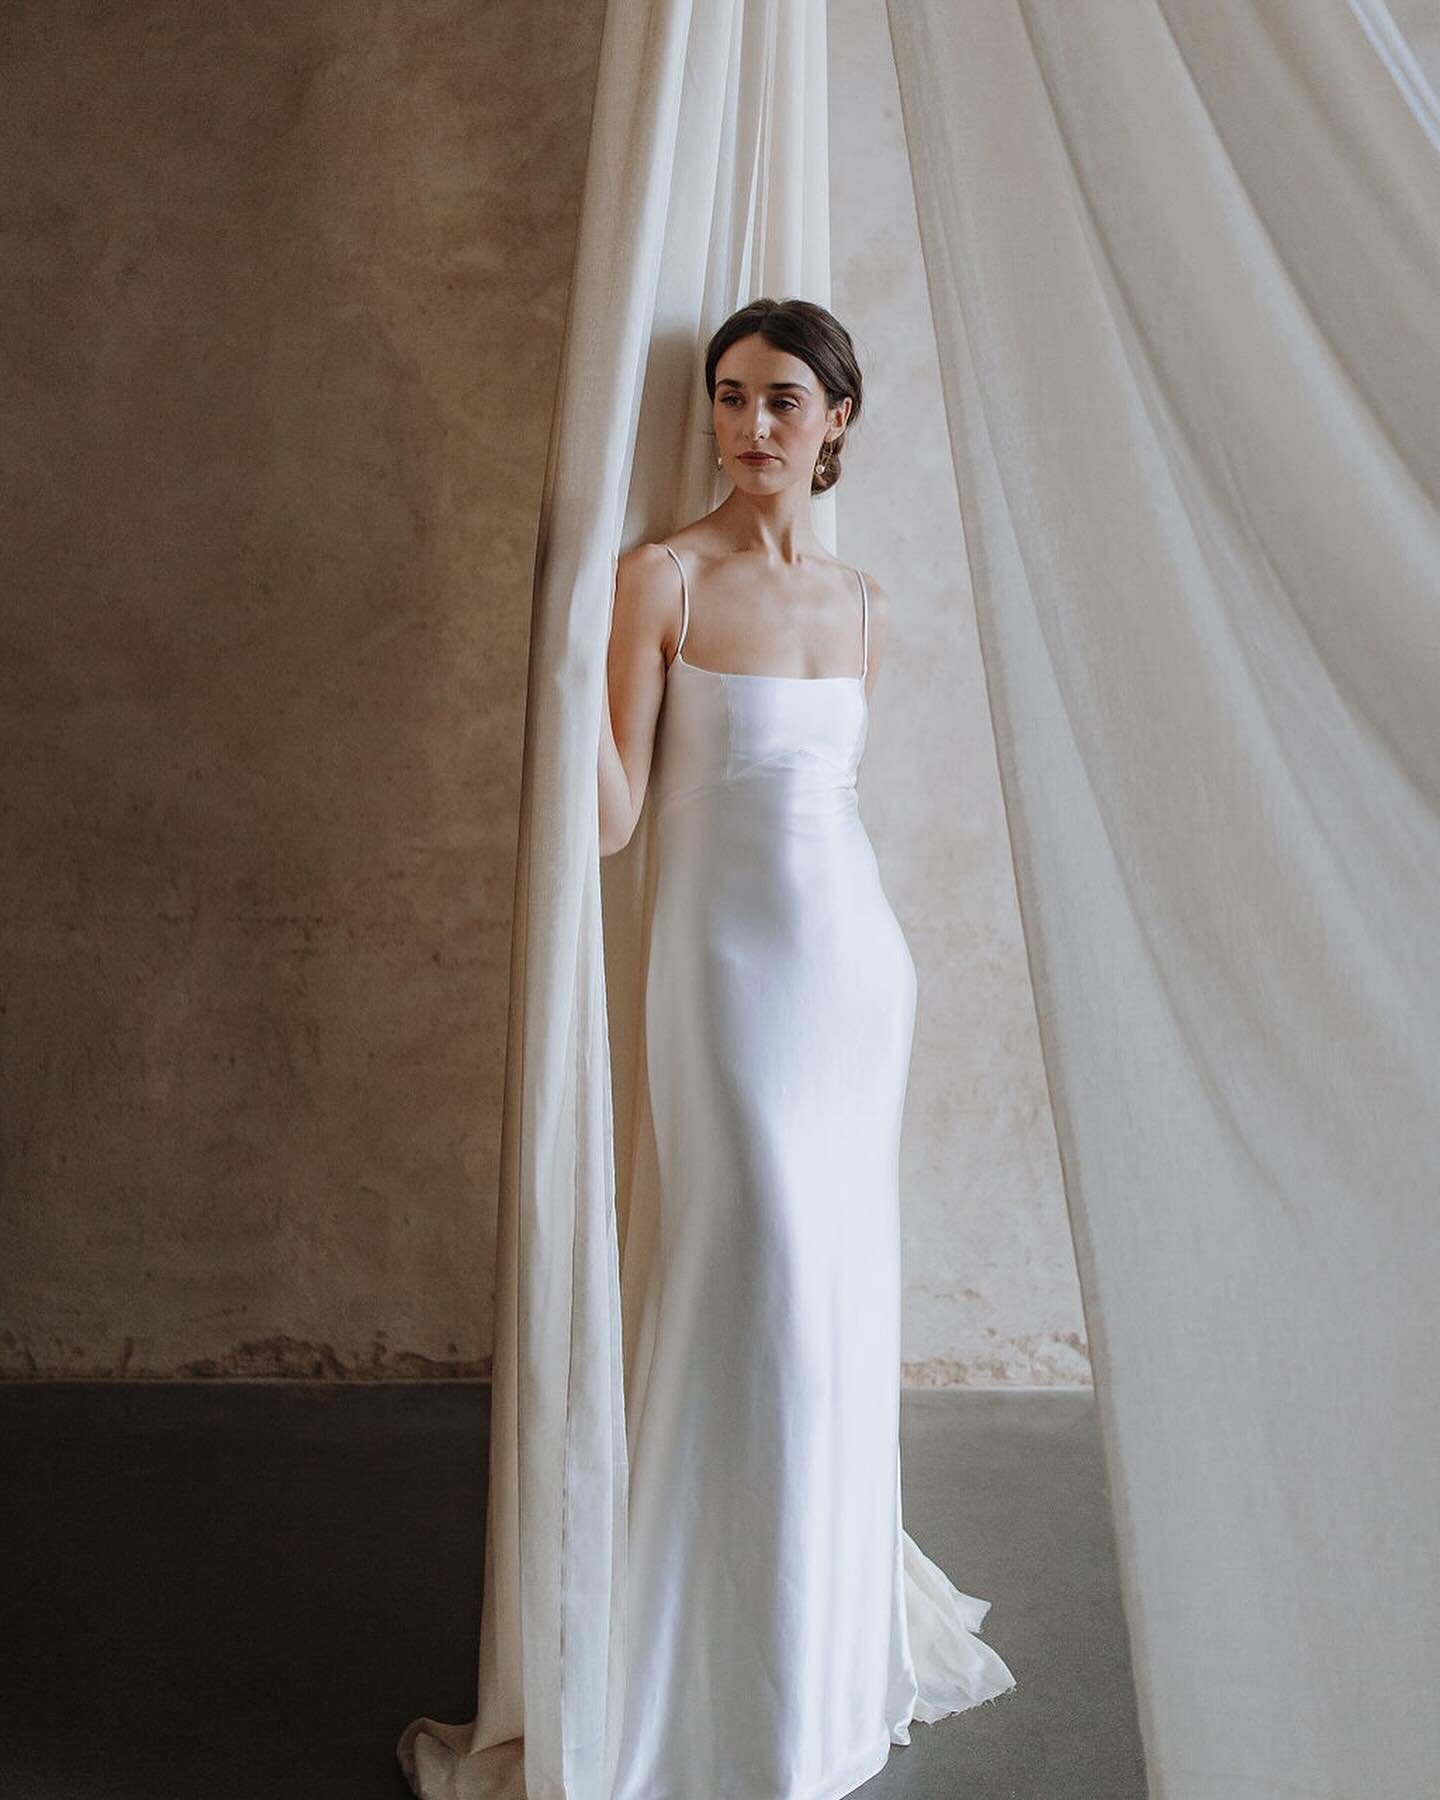 🖤 C O R A 🖤 

The epitome of sleek simplicity, Cora is the perfect base to build your bridal look upon. Choose to keep things minimalistic and modern letting this sumptuous fabric steal the show or add a bespoke design element to create an entirely